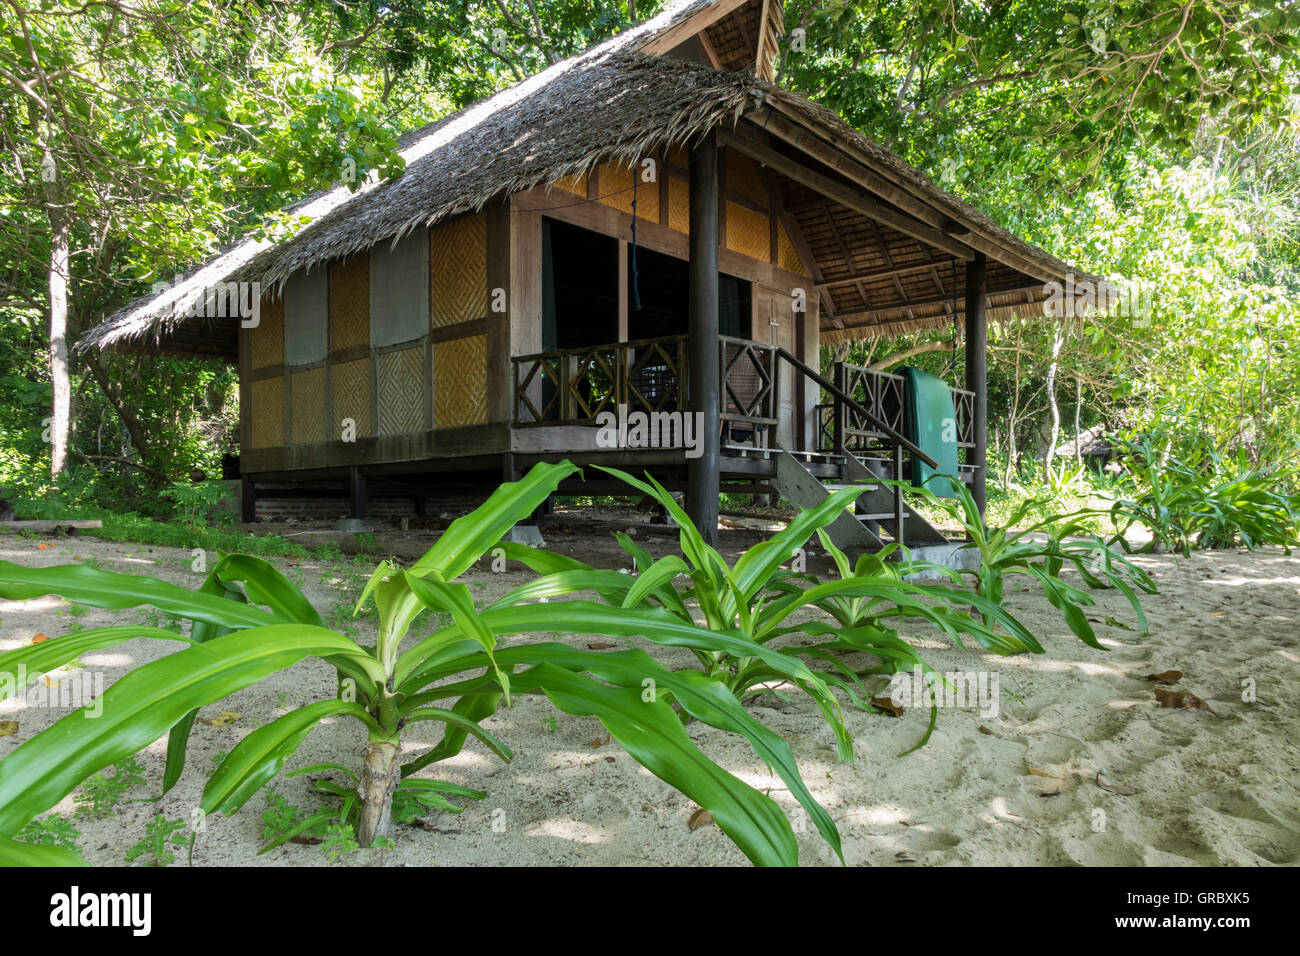 bungalow-traditional-style-surrounded-by-tropical-vegetation-selayar-GRBXK5.jpg